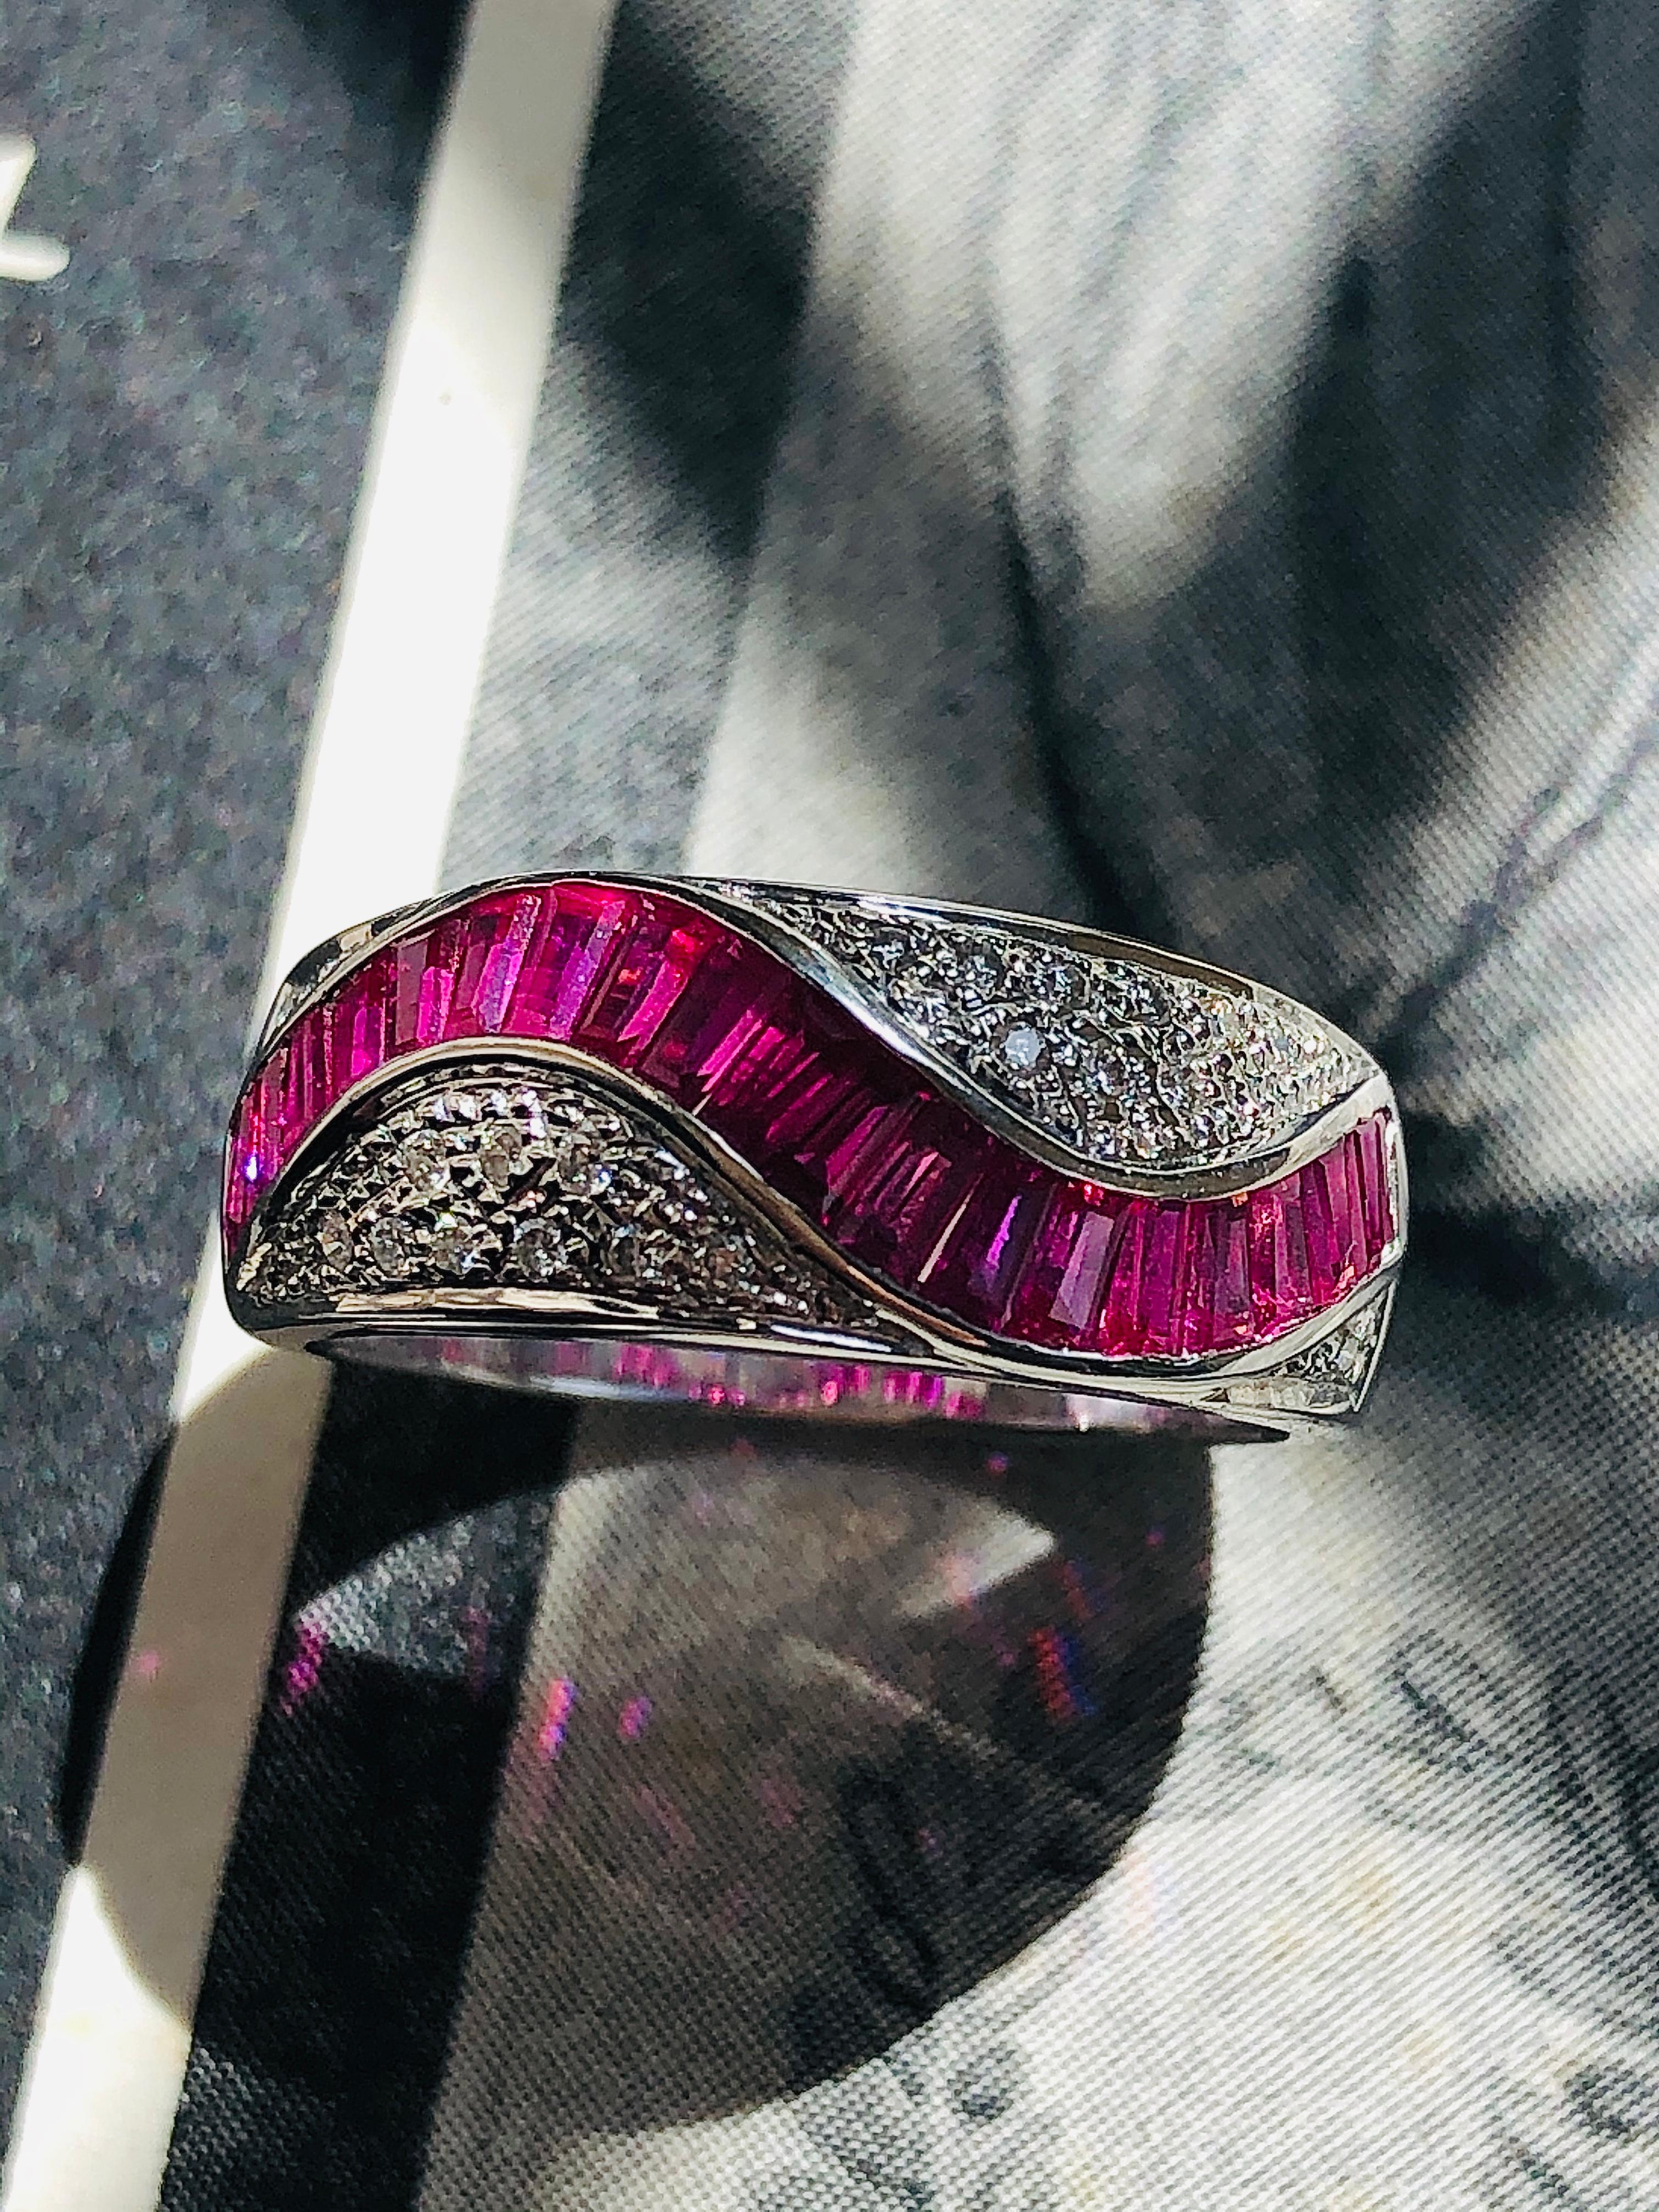 An incredibly stylish and vintage, Ruby and Diamond Ring. This simple and chic design is actually fiendishly difficult to produce, requiring perfectly sized rubies and variety of different setting techniques. The tapered-cut rubies would have been